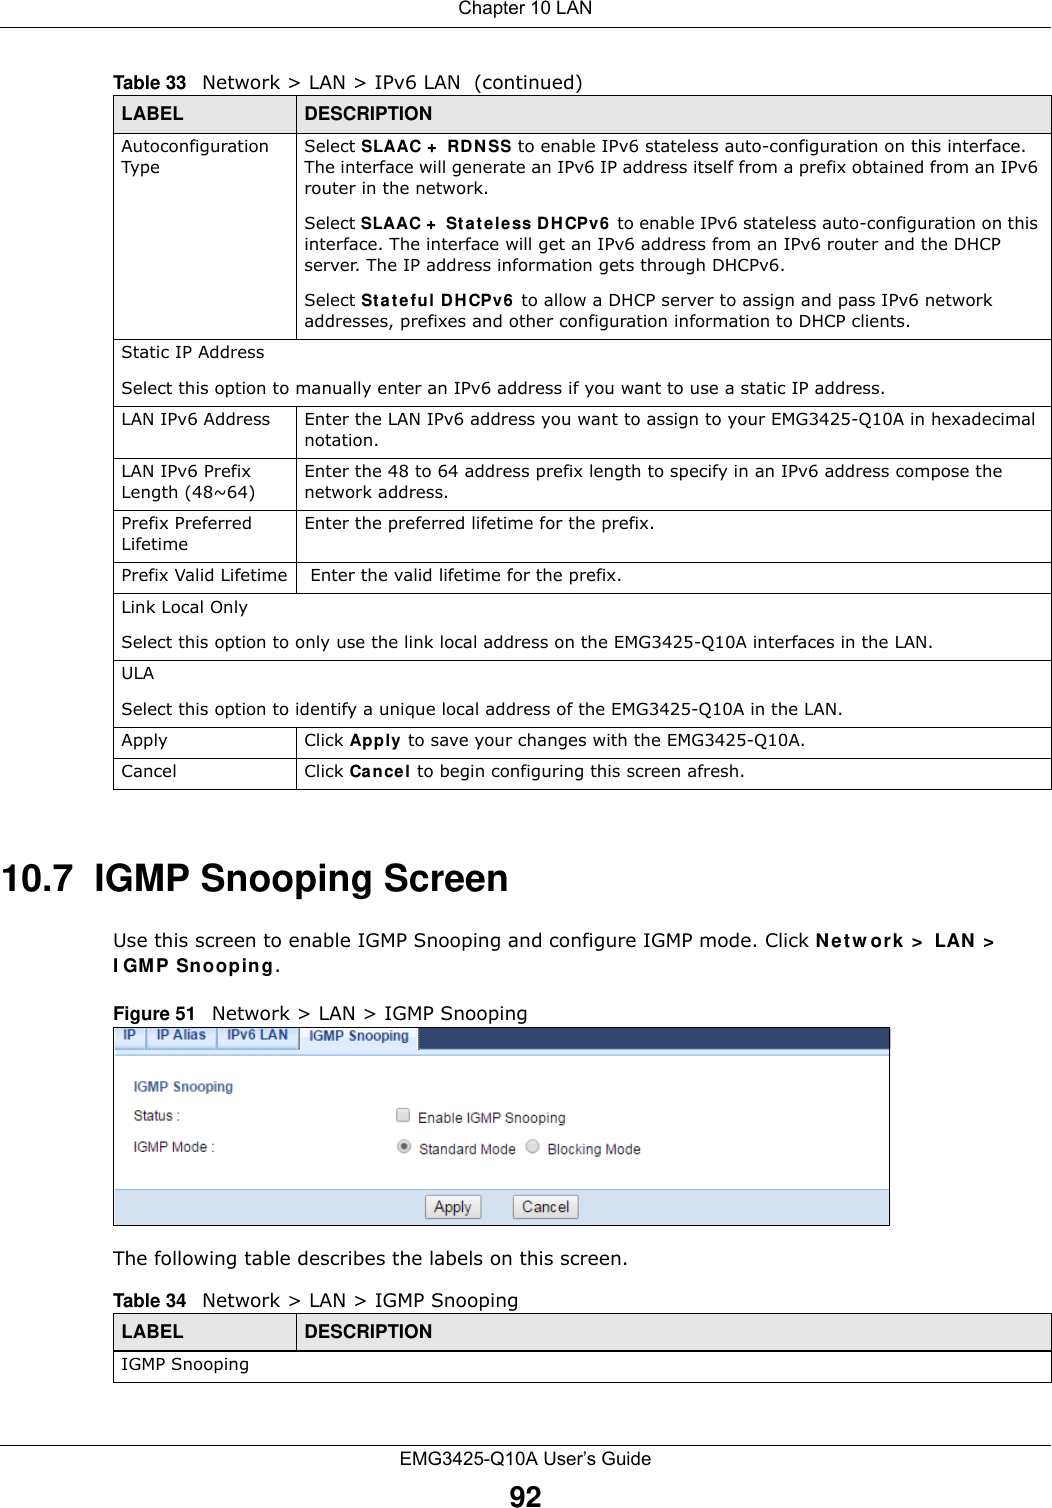 Chapter 10 LANEMG3425-Q10A User’s Guide9210.7  IGMP Snooping ScreenUse this screen to enable IGMP Snooping and configure IGMP mode. Click Net w ork &gt;  LAN &gt;  I GM P Sn oopin g.Figure 51   Network &gt; LAN &gt; IGMP SnoopingThe following table describes the labels on this screen.Autoconfiguration TypeSelect SLAAC +  RD N SS to enable IPv6 stateless auto-configuration on this interface. The interface will generate an IPv6 IP address itself from a prefix obtained from an IPv6 router in the network.Select SLAAC +  St a t eless D H CPv6  to enable IPv6 stateless auto-configuration on this interface. The interface will get an IPv6 address from an IPv6 router and the DHCP server. The IP address information gets through DHCPv6.Select Stateful DHCPv6  to allow a DHCP server to assign and pass IPv6 network addresses, prefixes and other configuration information to DHCP clients.Static IP AddressSelect this option to manually enter an IPv6 address if you want to use a static IP address.LAN IPv6 Address Enter the LAN IPv6 address you want to assign to your EMG3425-Q10A in hexadecimal notation.LAN IPv6 Prefix Length (48~64)Enter the 48 to 64 address prefix length to specify in an IPv6 address compose the network address.Prefix Preferred LifetimeEnter the preferred lifetime for the prefix.Prefix Valid Lifetime  Enter the valid lifetime for the prefix.Link Local OnlySelect this option to only use the link local address on the EMG3425-Q10A interfaces in the LAN.ULASelect this option to identify a unique local address of the EMG3425-Q10A in the LAN.  Apply Click Apply  to save your changes with the EMG3425-Q10A.Cancel Click Cancel to begin configuring this screen afresh.Table 33   Network &gt; LAN &gt; IPv6 LAN  (continued)LABEL DESCRIPTIONTable 34   Network &gt; LAN &gt; IGMP Snooping LABEL DESCRIPTIONIGMP Snooping